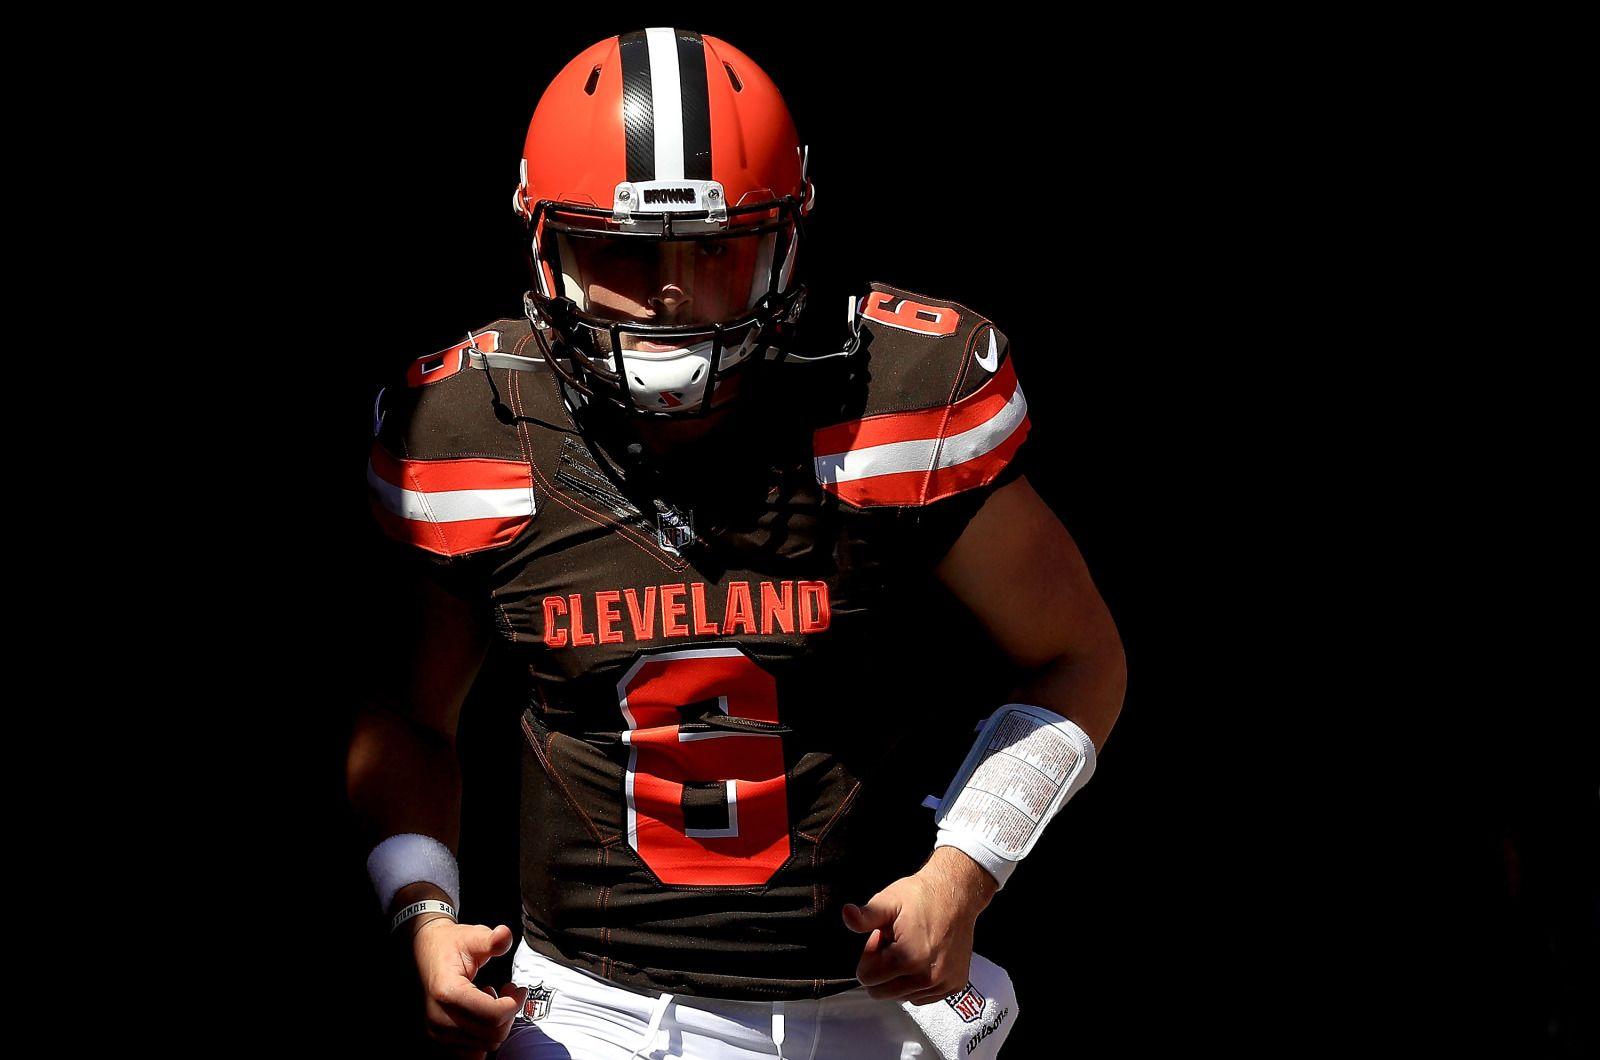 Cleveland Browns: Baker Mayfield's handling of coaching change shows